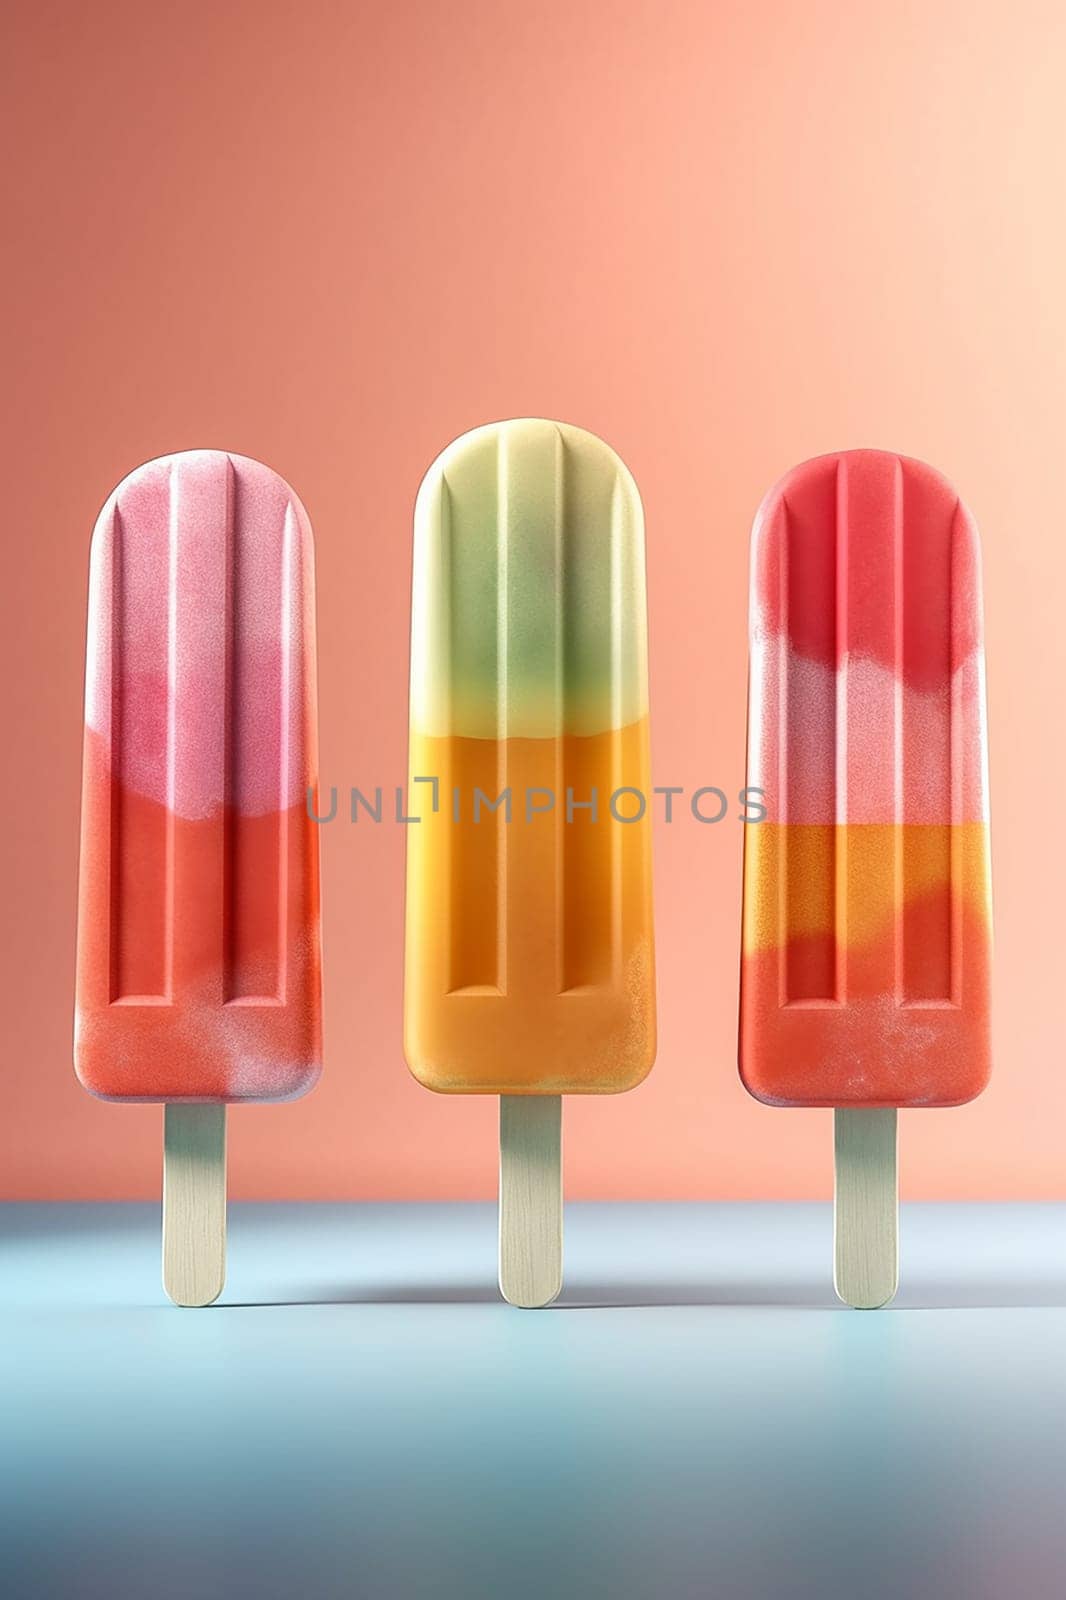 Three striped popsicles with different color patterns on a gradient background